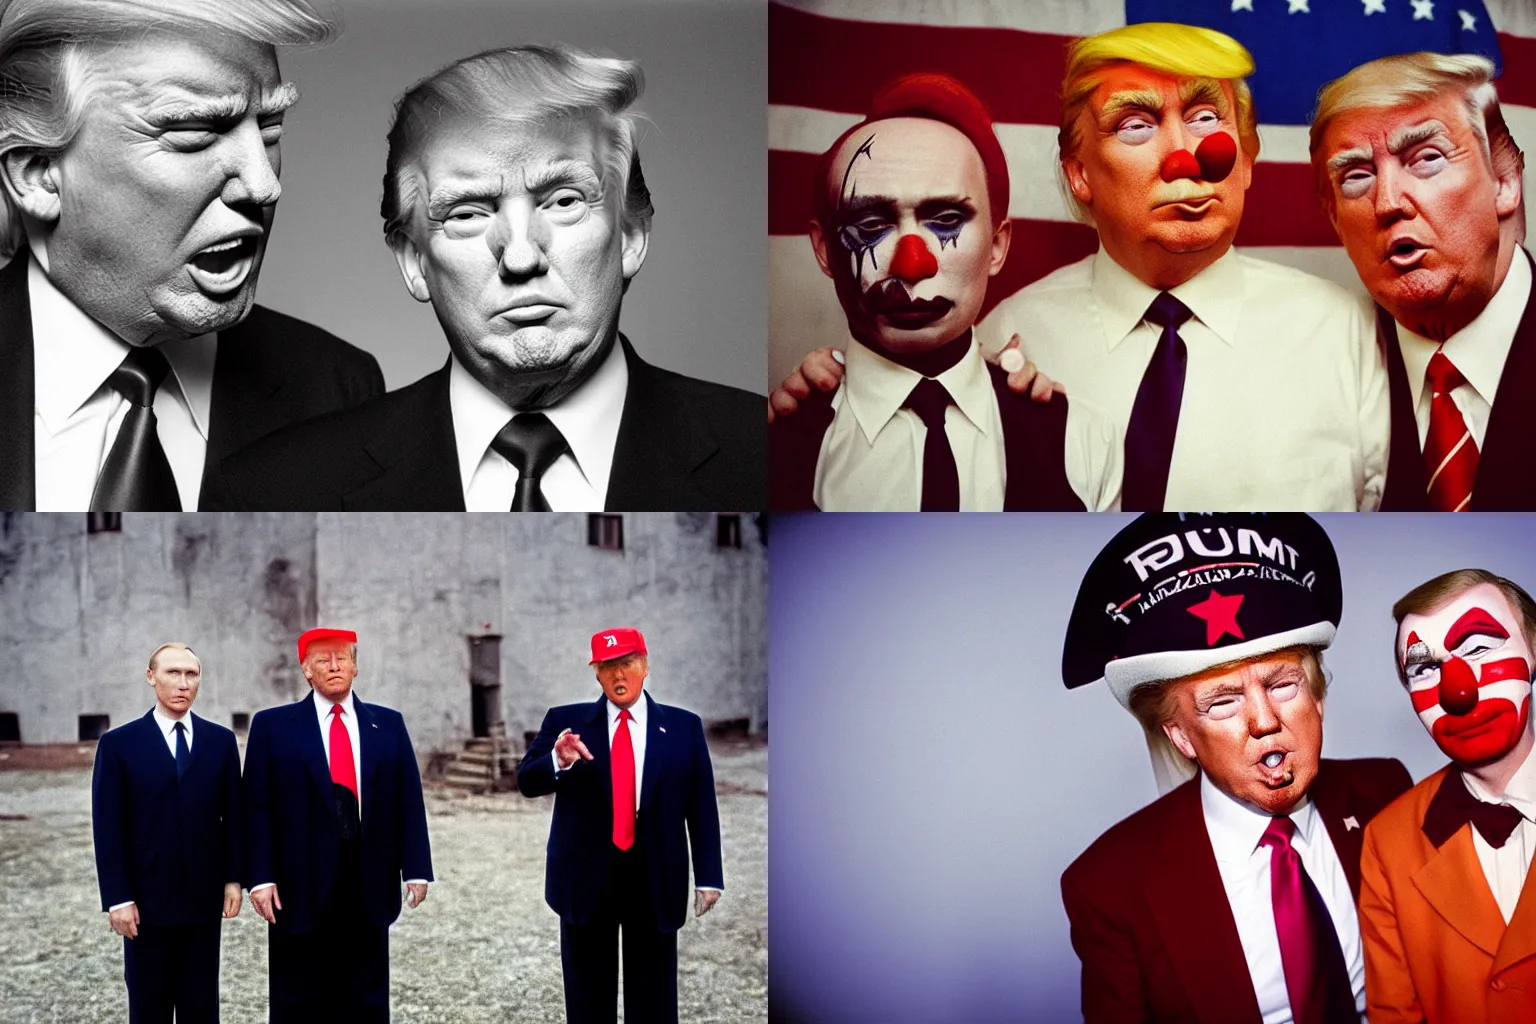 Prompt: color portrait photograph of Donald Trump and Vladmir Putin in clown makeup and wearing Schutzstaffel outfit, off-camera flash, canon 24mm f4 aperture, shallow depth of field, 1/400 shutterspeed, Ektachrome color photograph